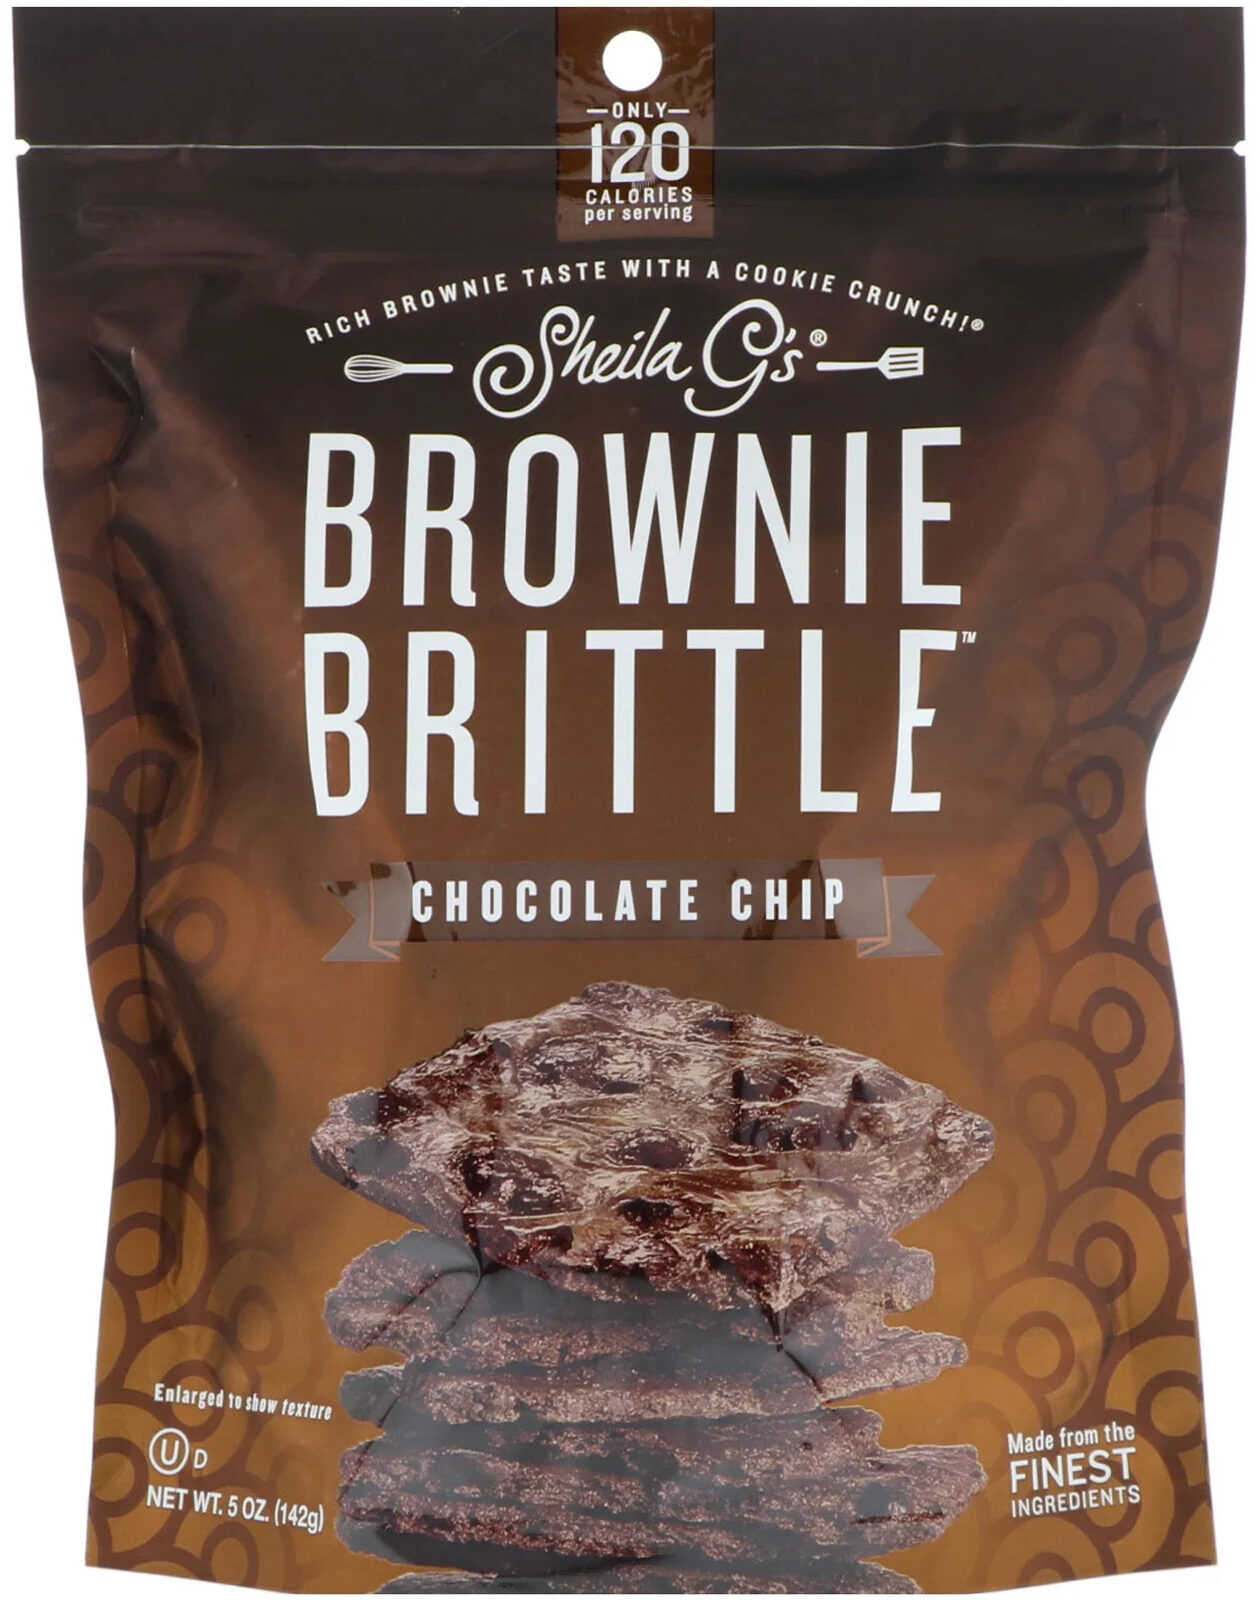 Brownie brittle, chocolate chip - Product